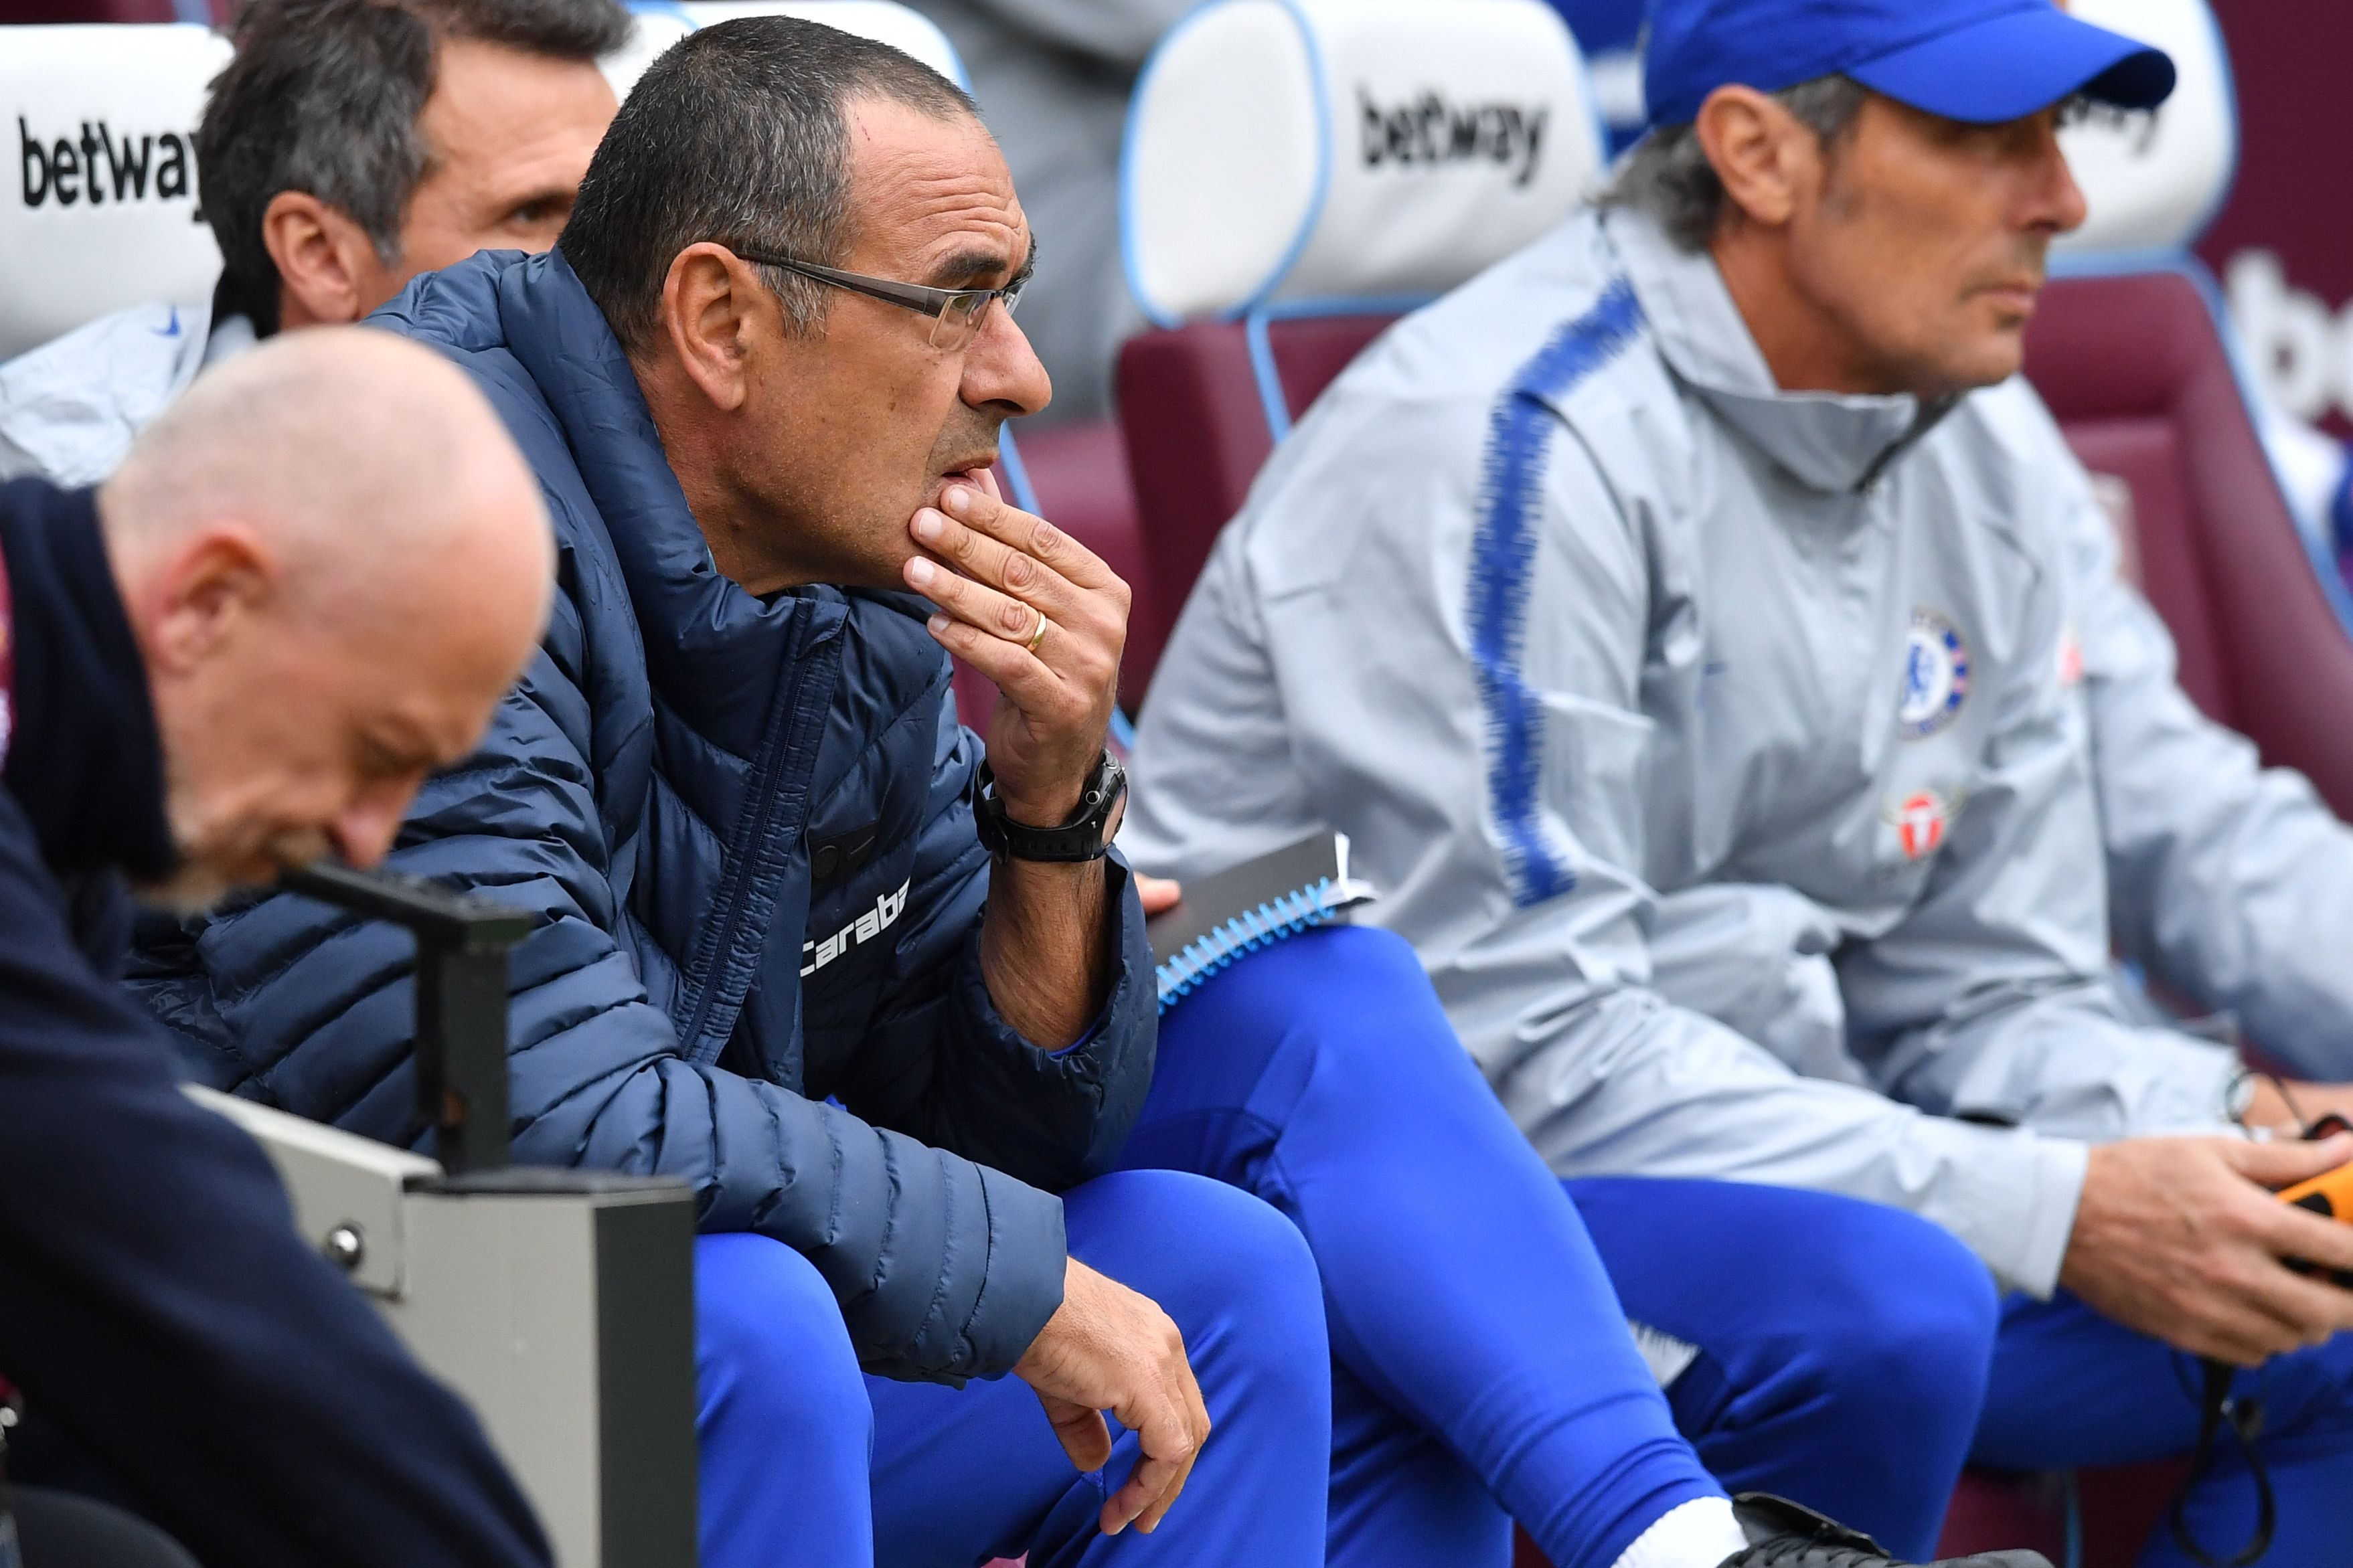 Chelsea's Italian head coach Maurizio Sarri awaits kick off in the English Premier League football match between West Ham United and Chelsea at The London Stadium, in east London on September 23, 2018. (Photo by Ben STANSALL / AFP) / RESTRICTED TO EDITORIAL USE. No use with unauthorized audio, video, data, fixture lists, club/league logos or 'live' services. Online in-match use limited to 120 images. An additional 40 images may be used in extra time. No video emulation. Social media in-match use limited to 120 images. An additional 40 images may be used in extra time. No use in betting publications, games or single club/league/player publications. /         (Photo credit should read BEN STANSALL/AFP/Getty Images)